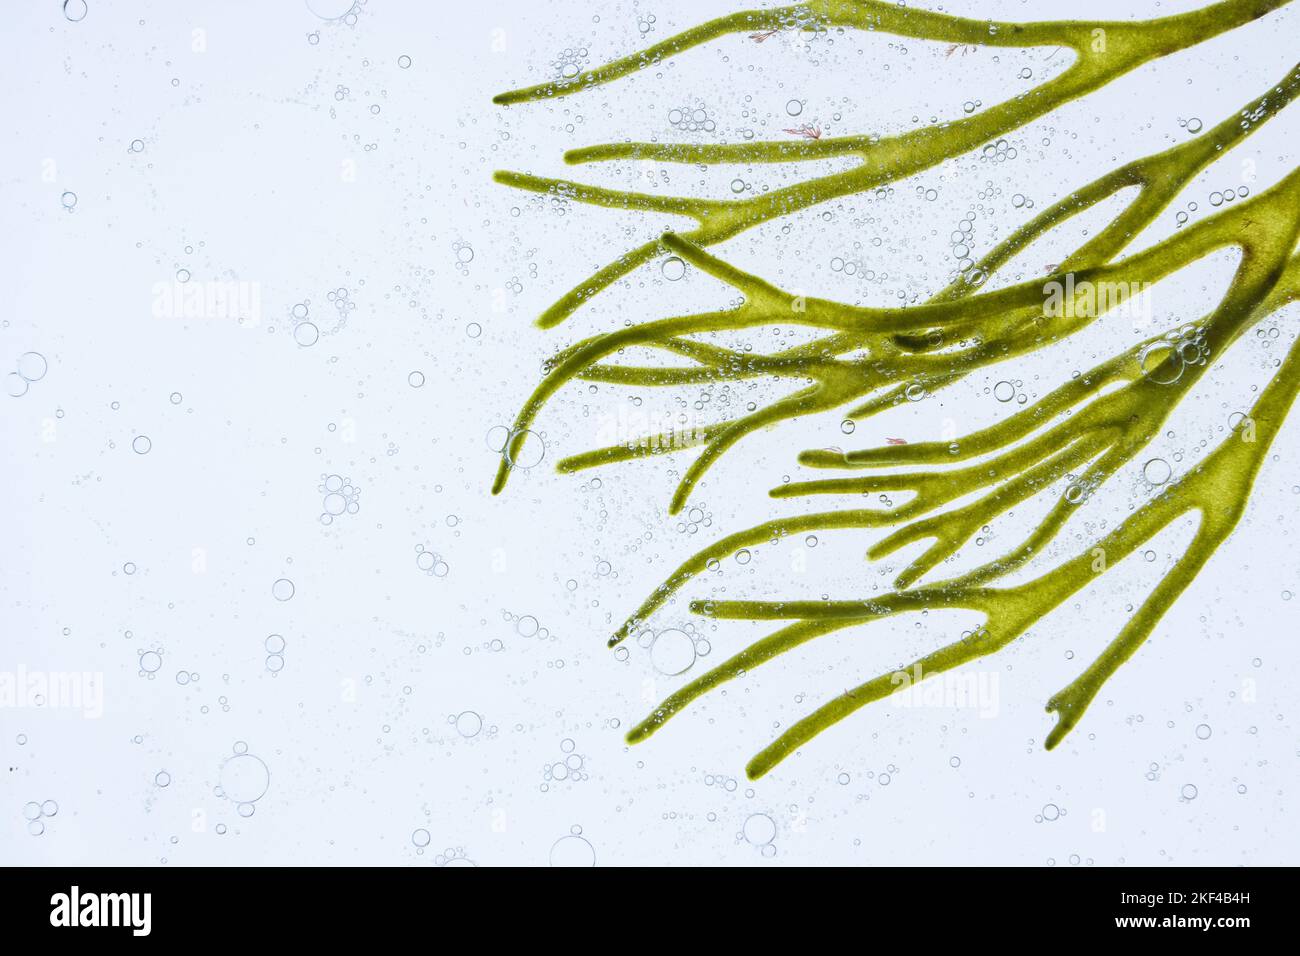 Codium tomentosum or velvet horn or spongeweed green alga branch and air bubbles in the water. Stock Photo